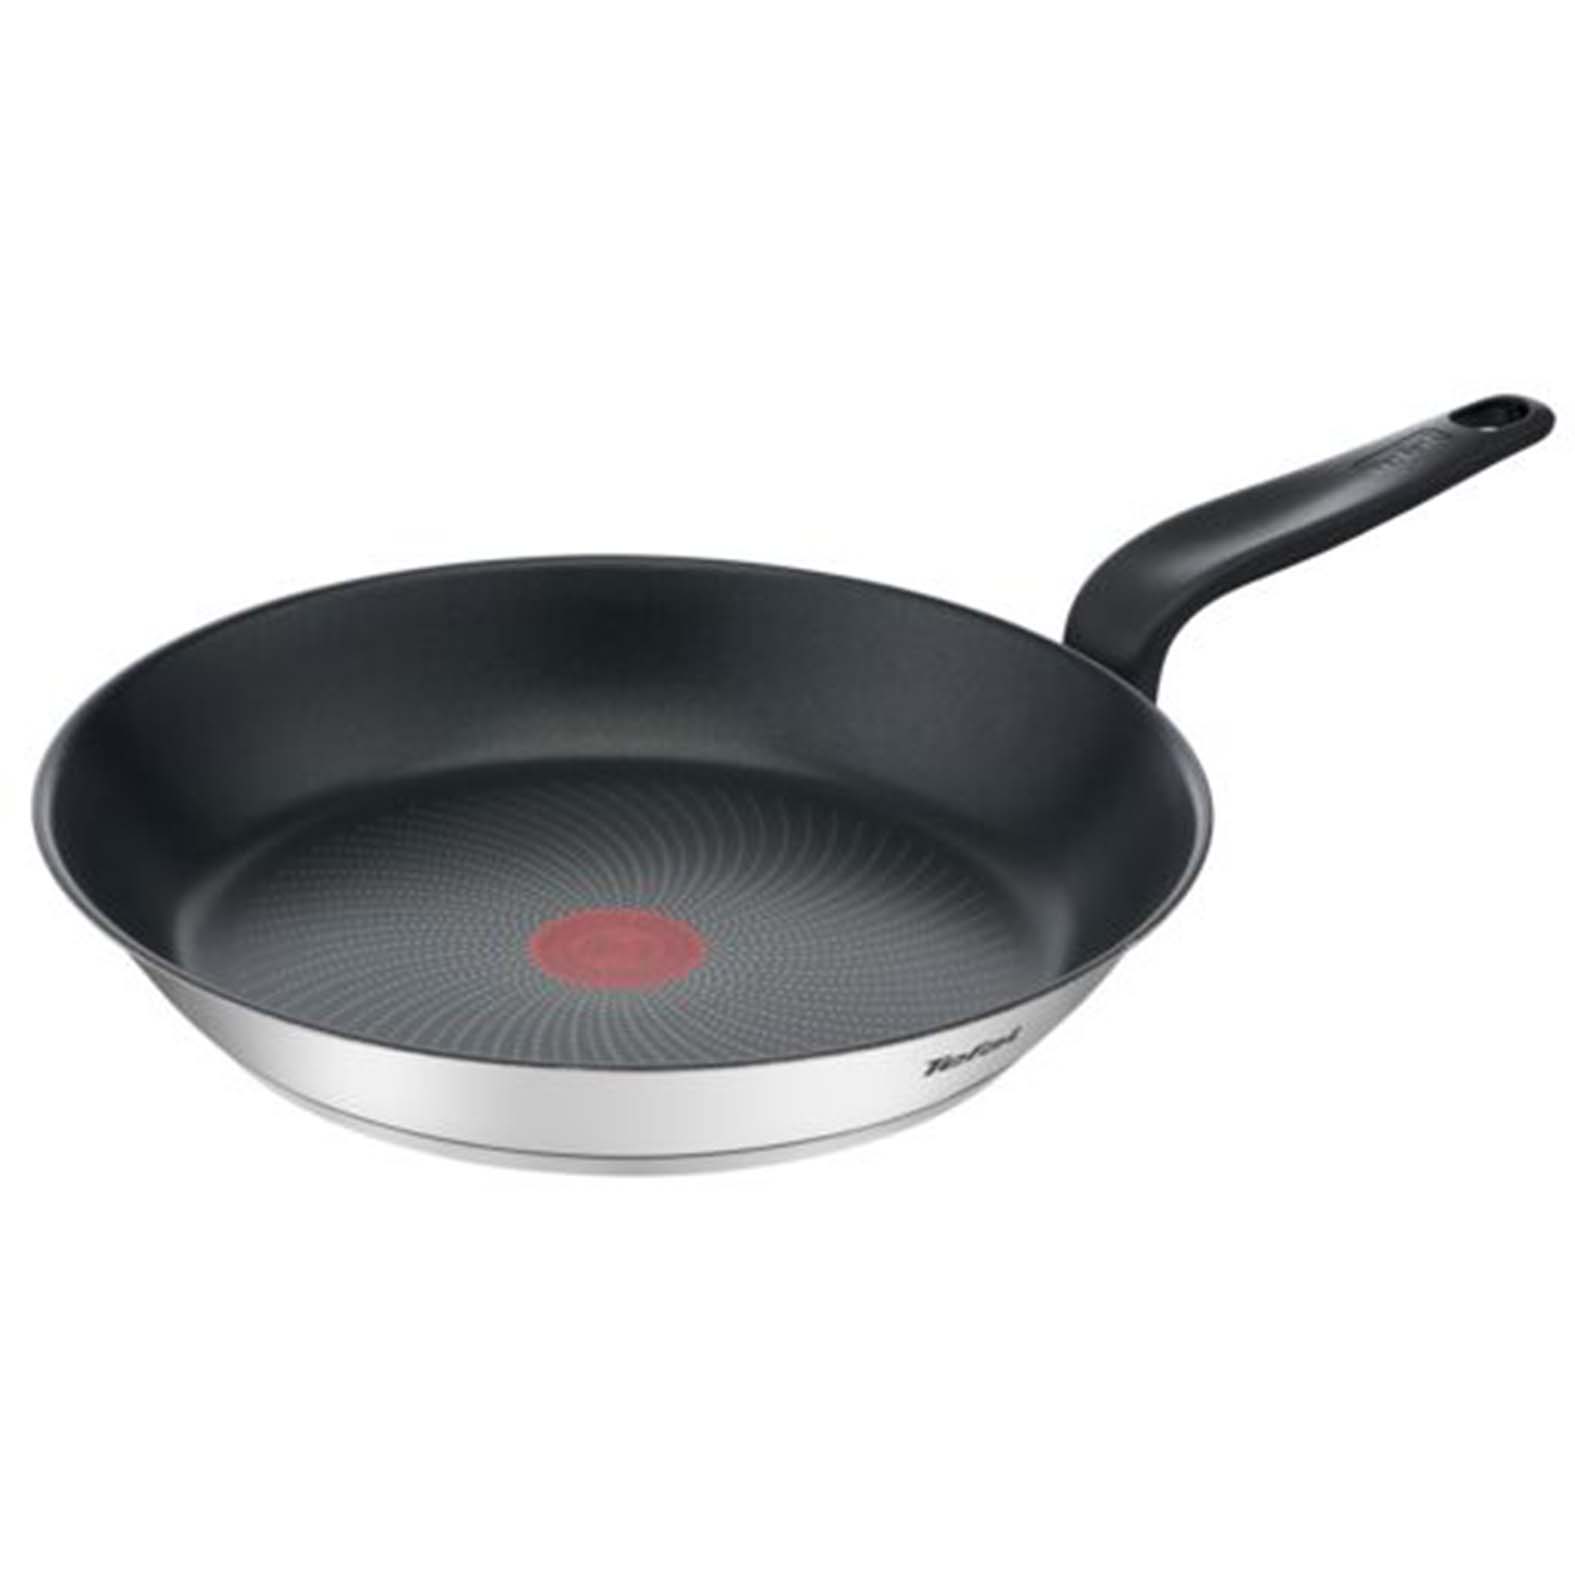 Tefal Primary Non-Stick Stainless Steel Saucepan, 28cm